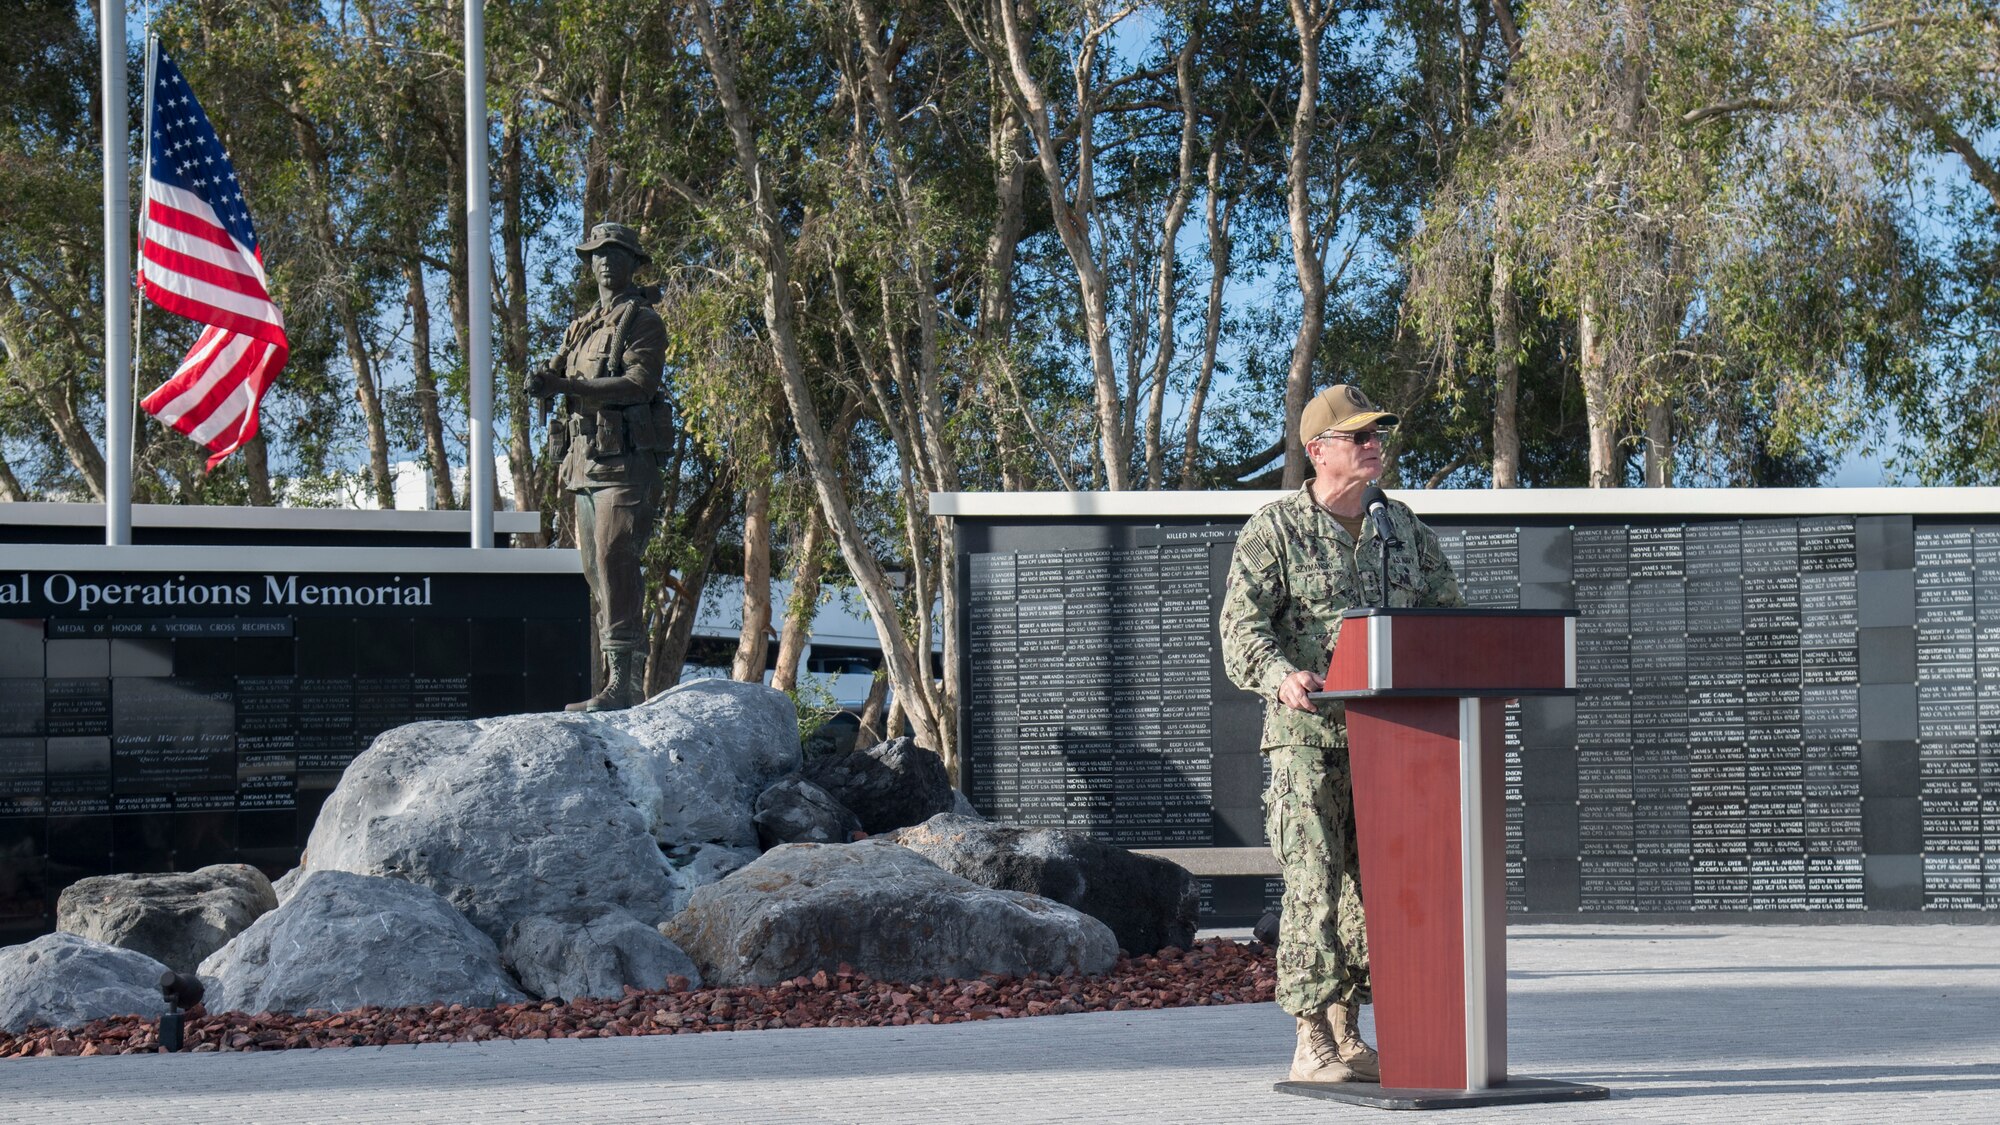 U.S. Navy Vice Adm. Tim Szymanski, the U.S. Special Operations Command deputy commander, delivers remarks during a 9/11 Observance Ceremony Sept. 11, 2020, at MacDill Air Force Base, Fla